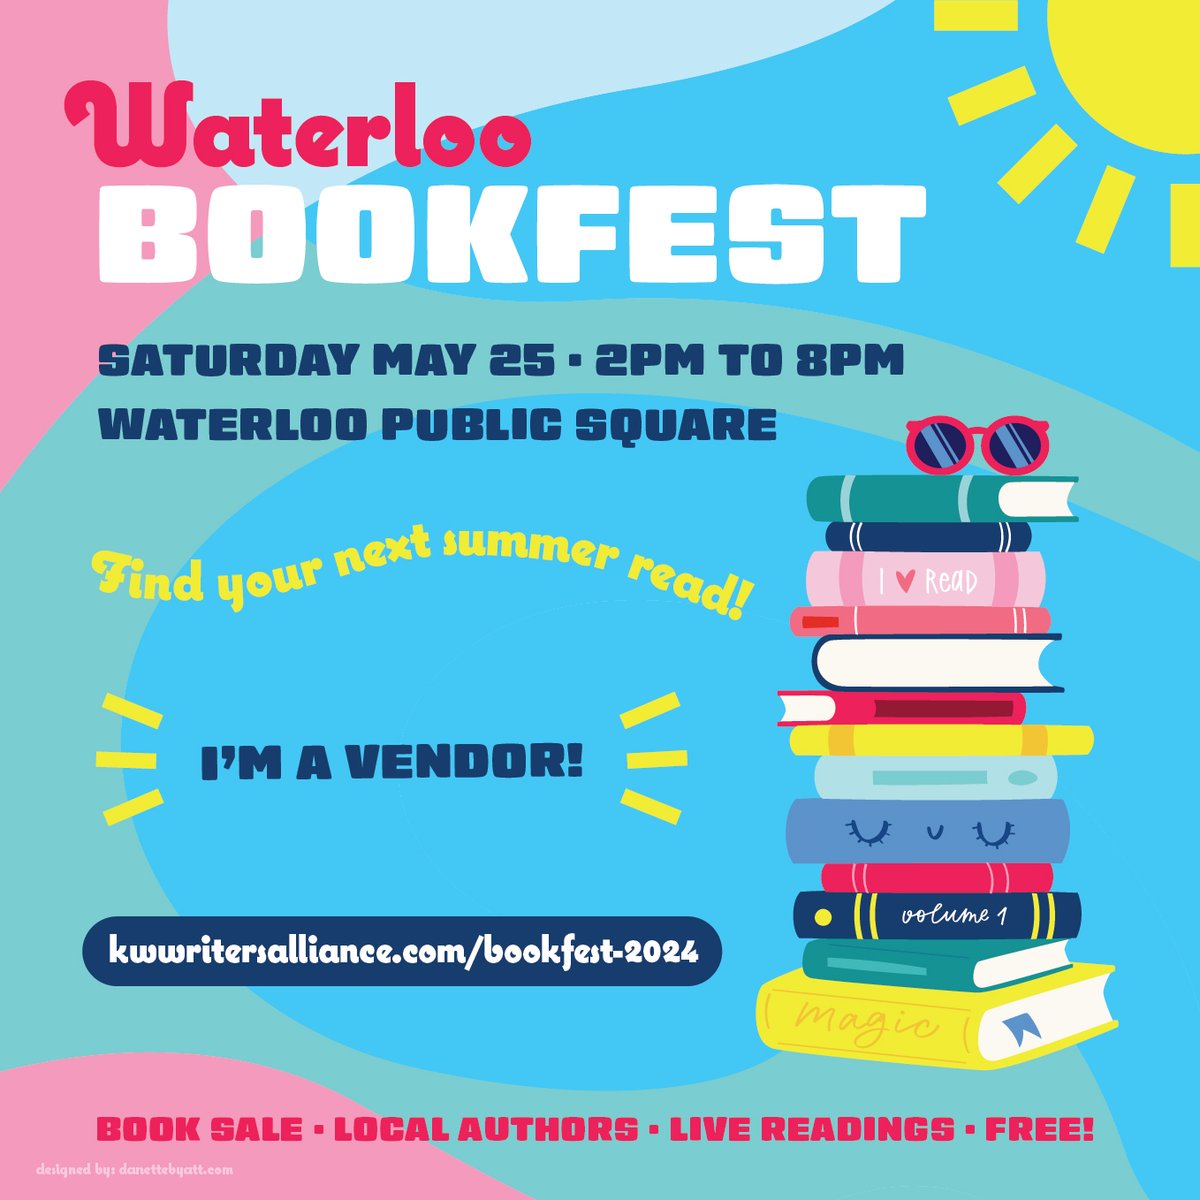 Can't wait to see people! #kwawesome #waterloo #bookfest #books